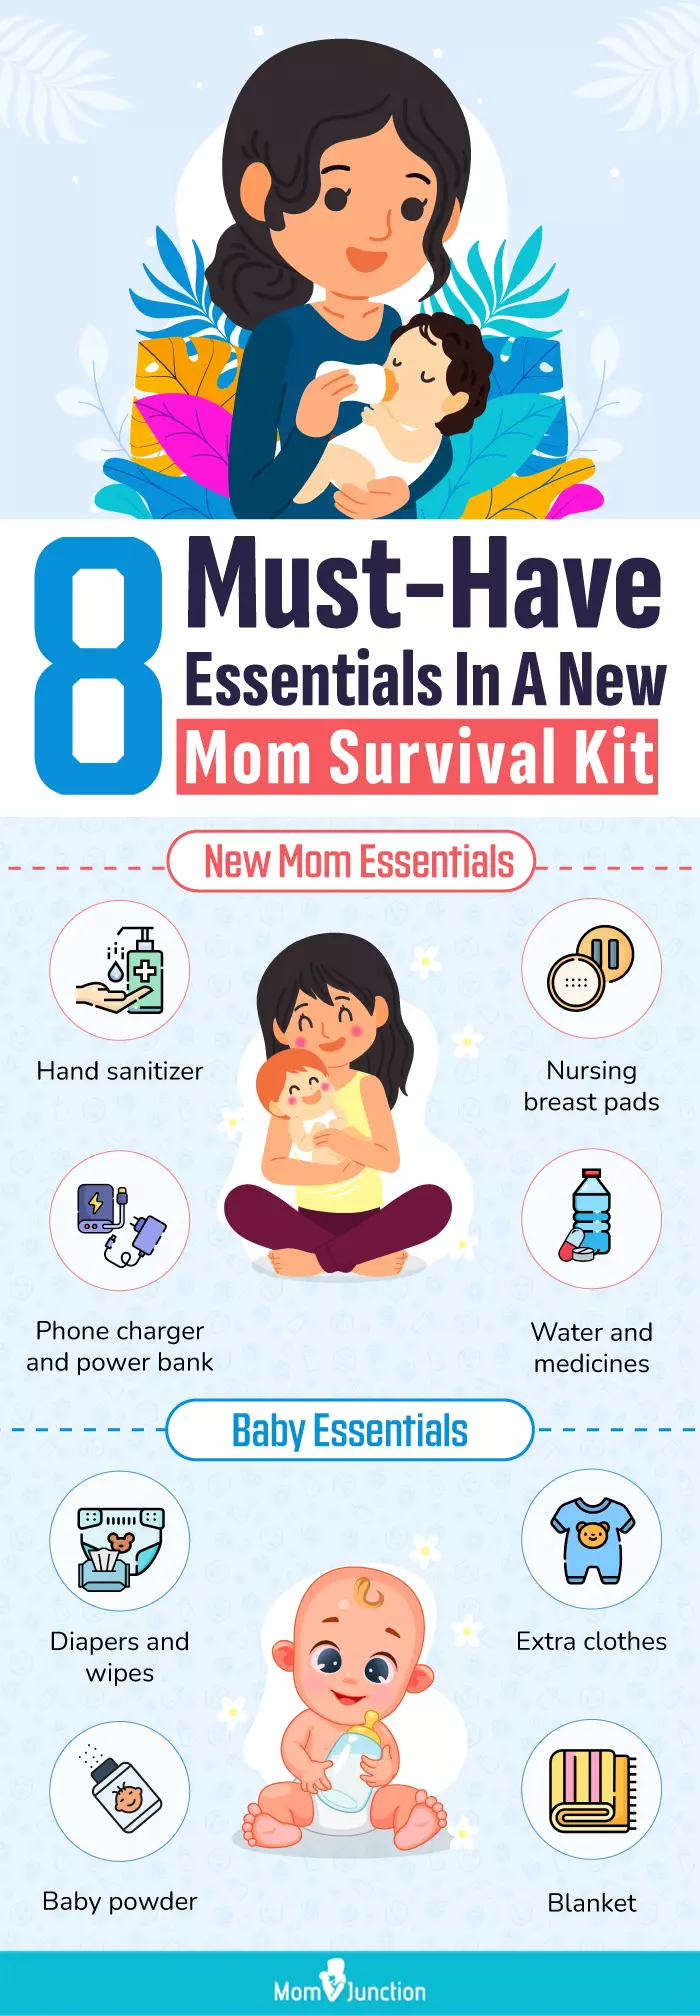 8 must have essentials in a new mom survival kit (infographic)